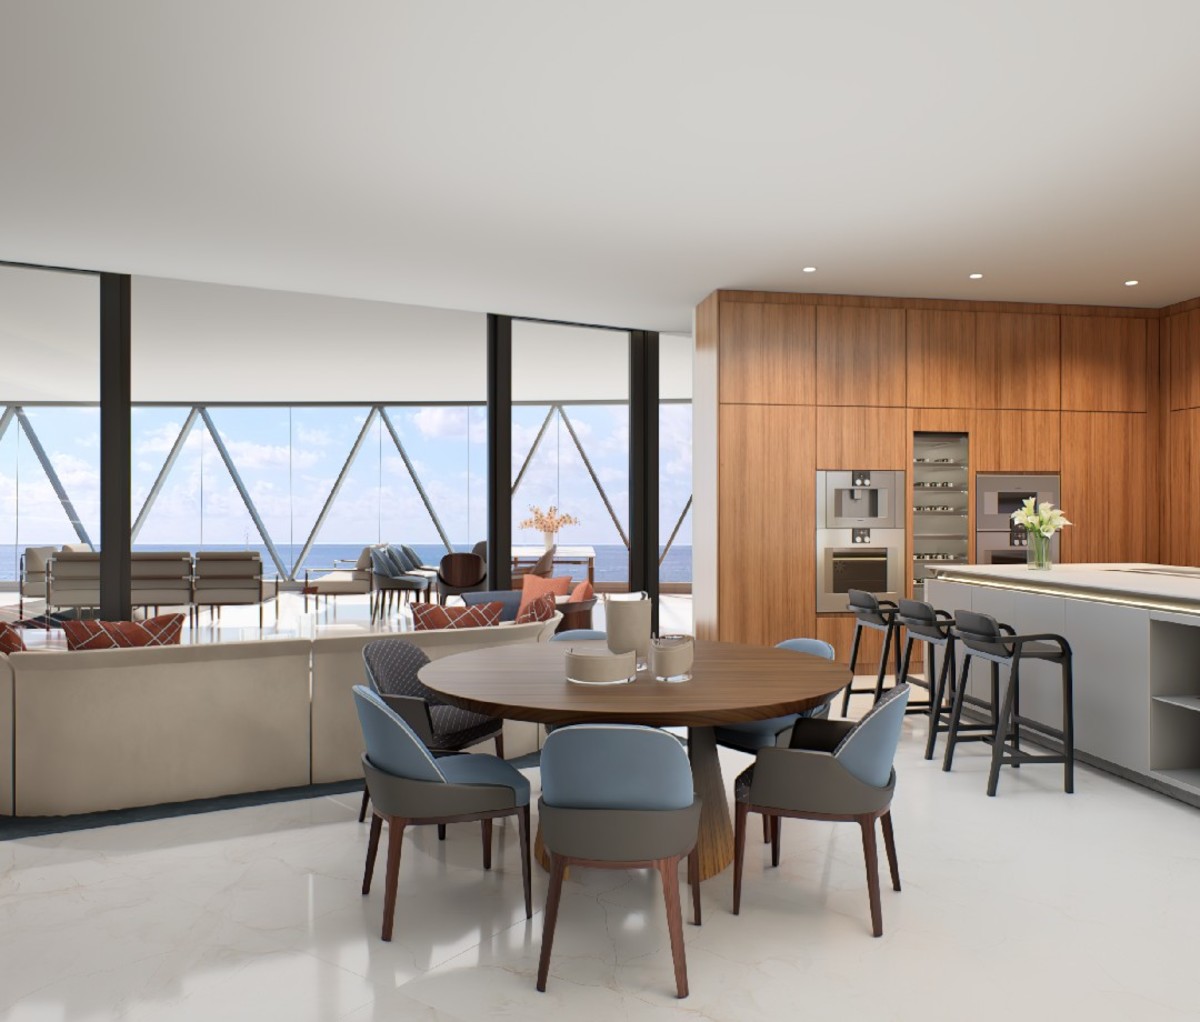 Dining and kitchen area of Bentley Residences Miami, with ocean view in background.